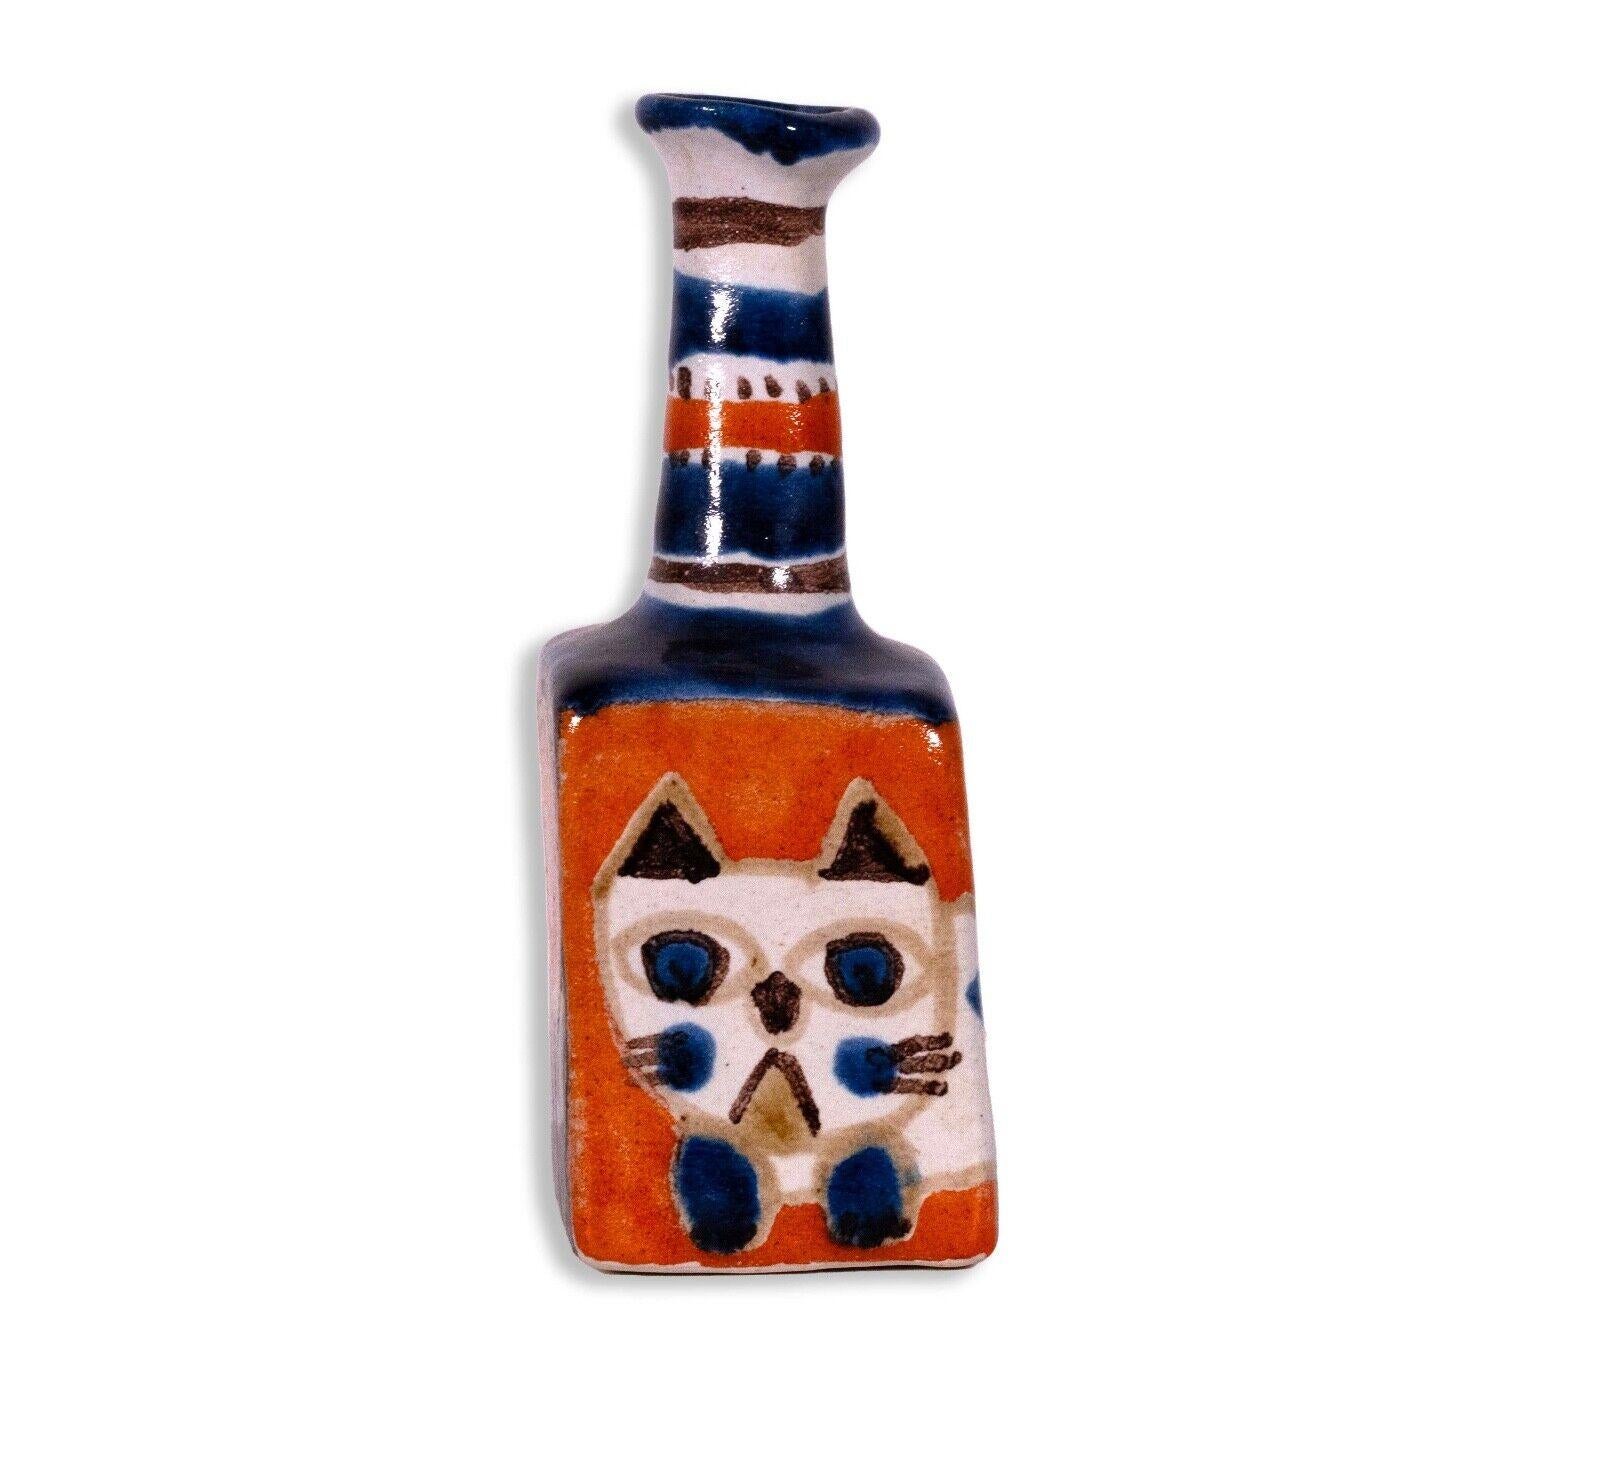 Desimonte Italy Signed Ceramic Cat Design Hand Painted Mid Century Modern Vase In Good Condition For Sale In Keego Harbor, MI